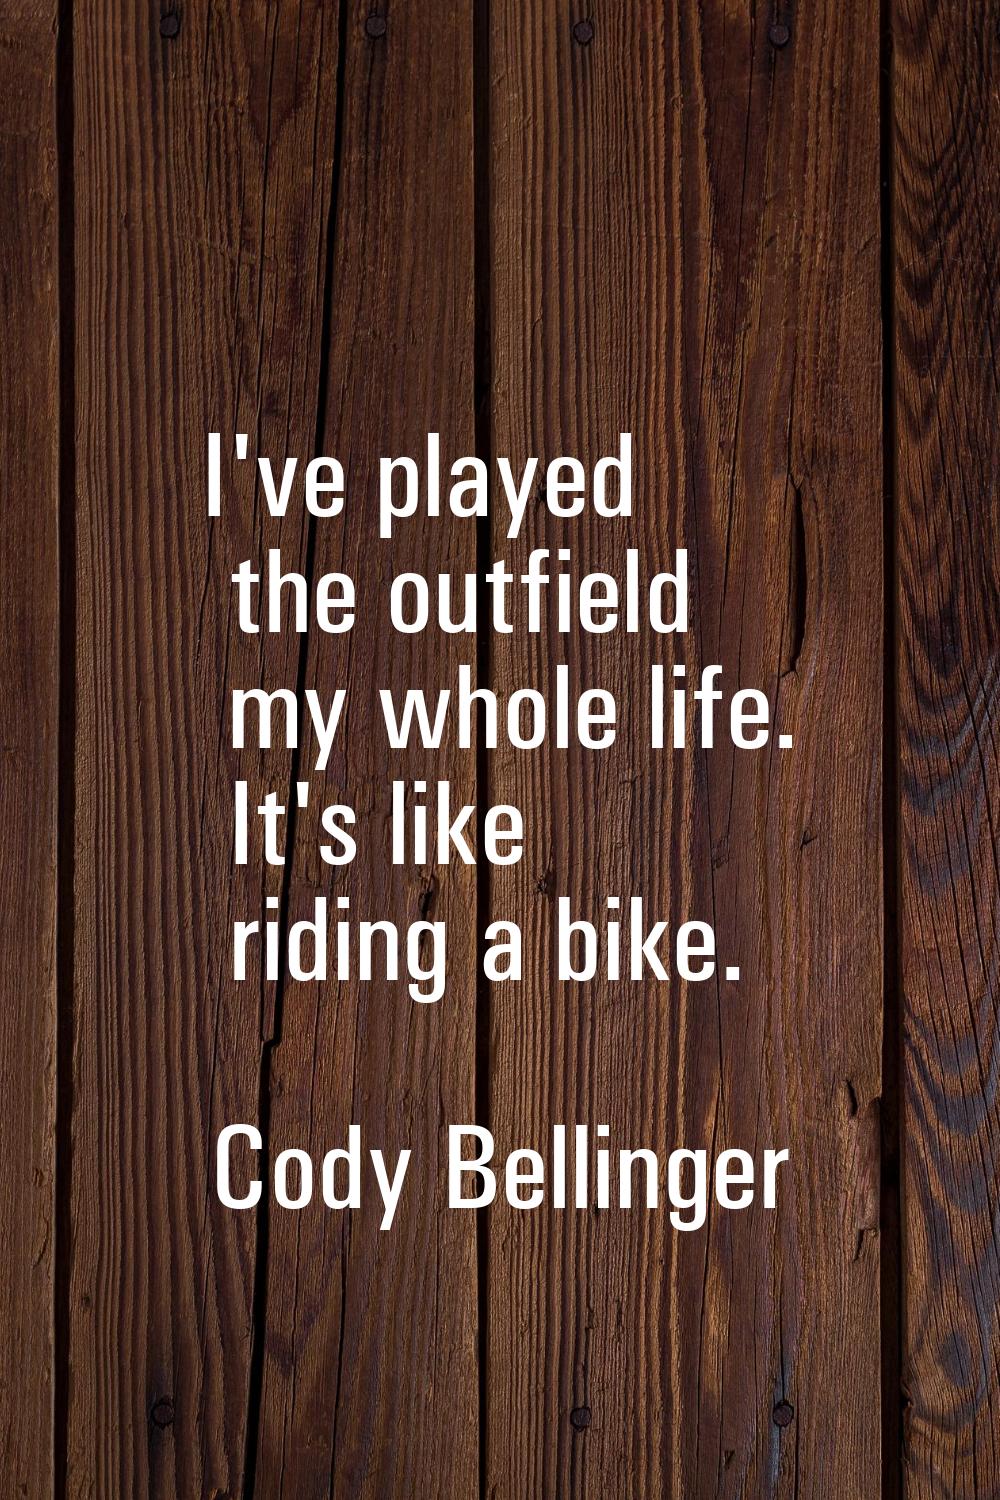 I've played the outfield my whole life. It's like riding a bike.